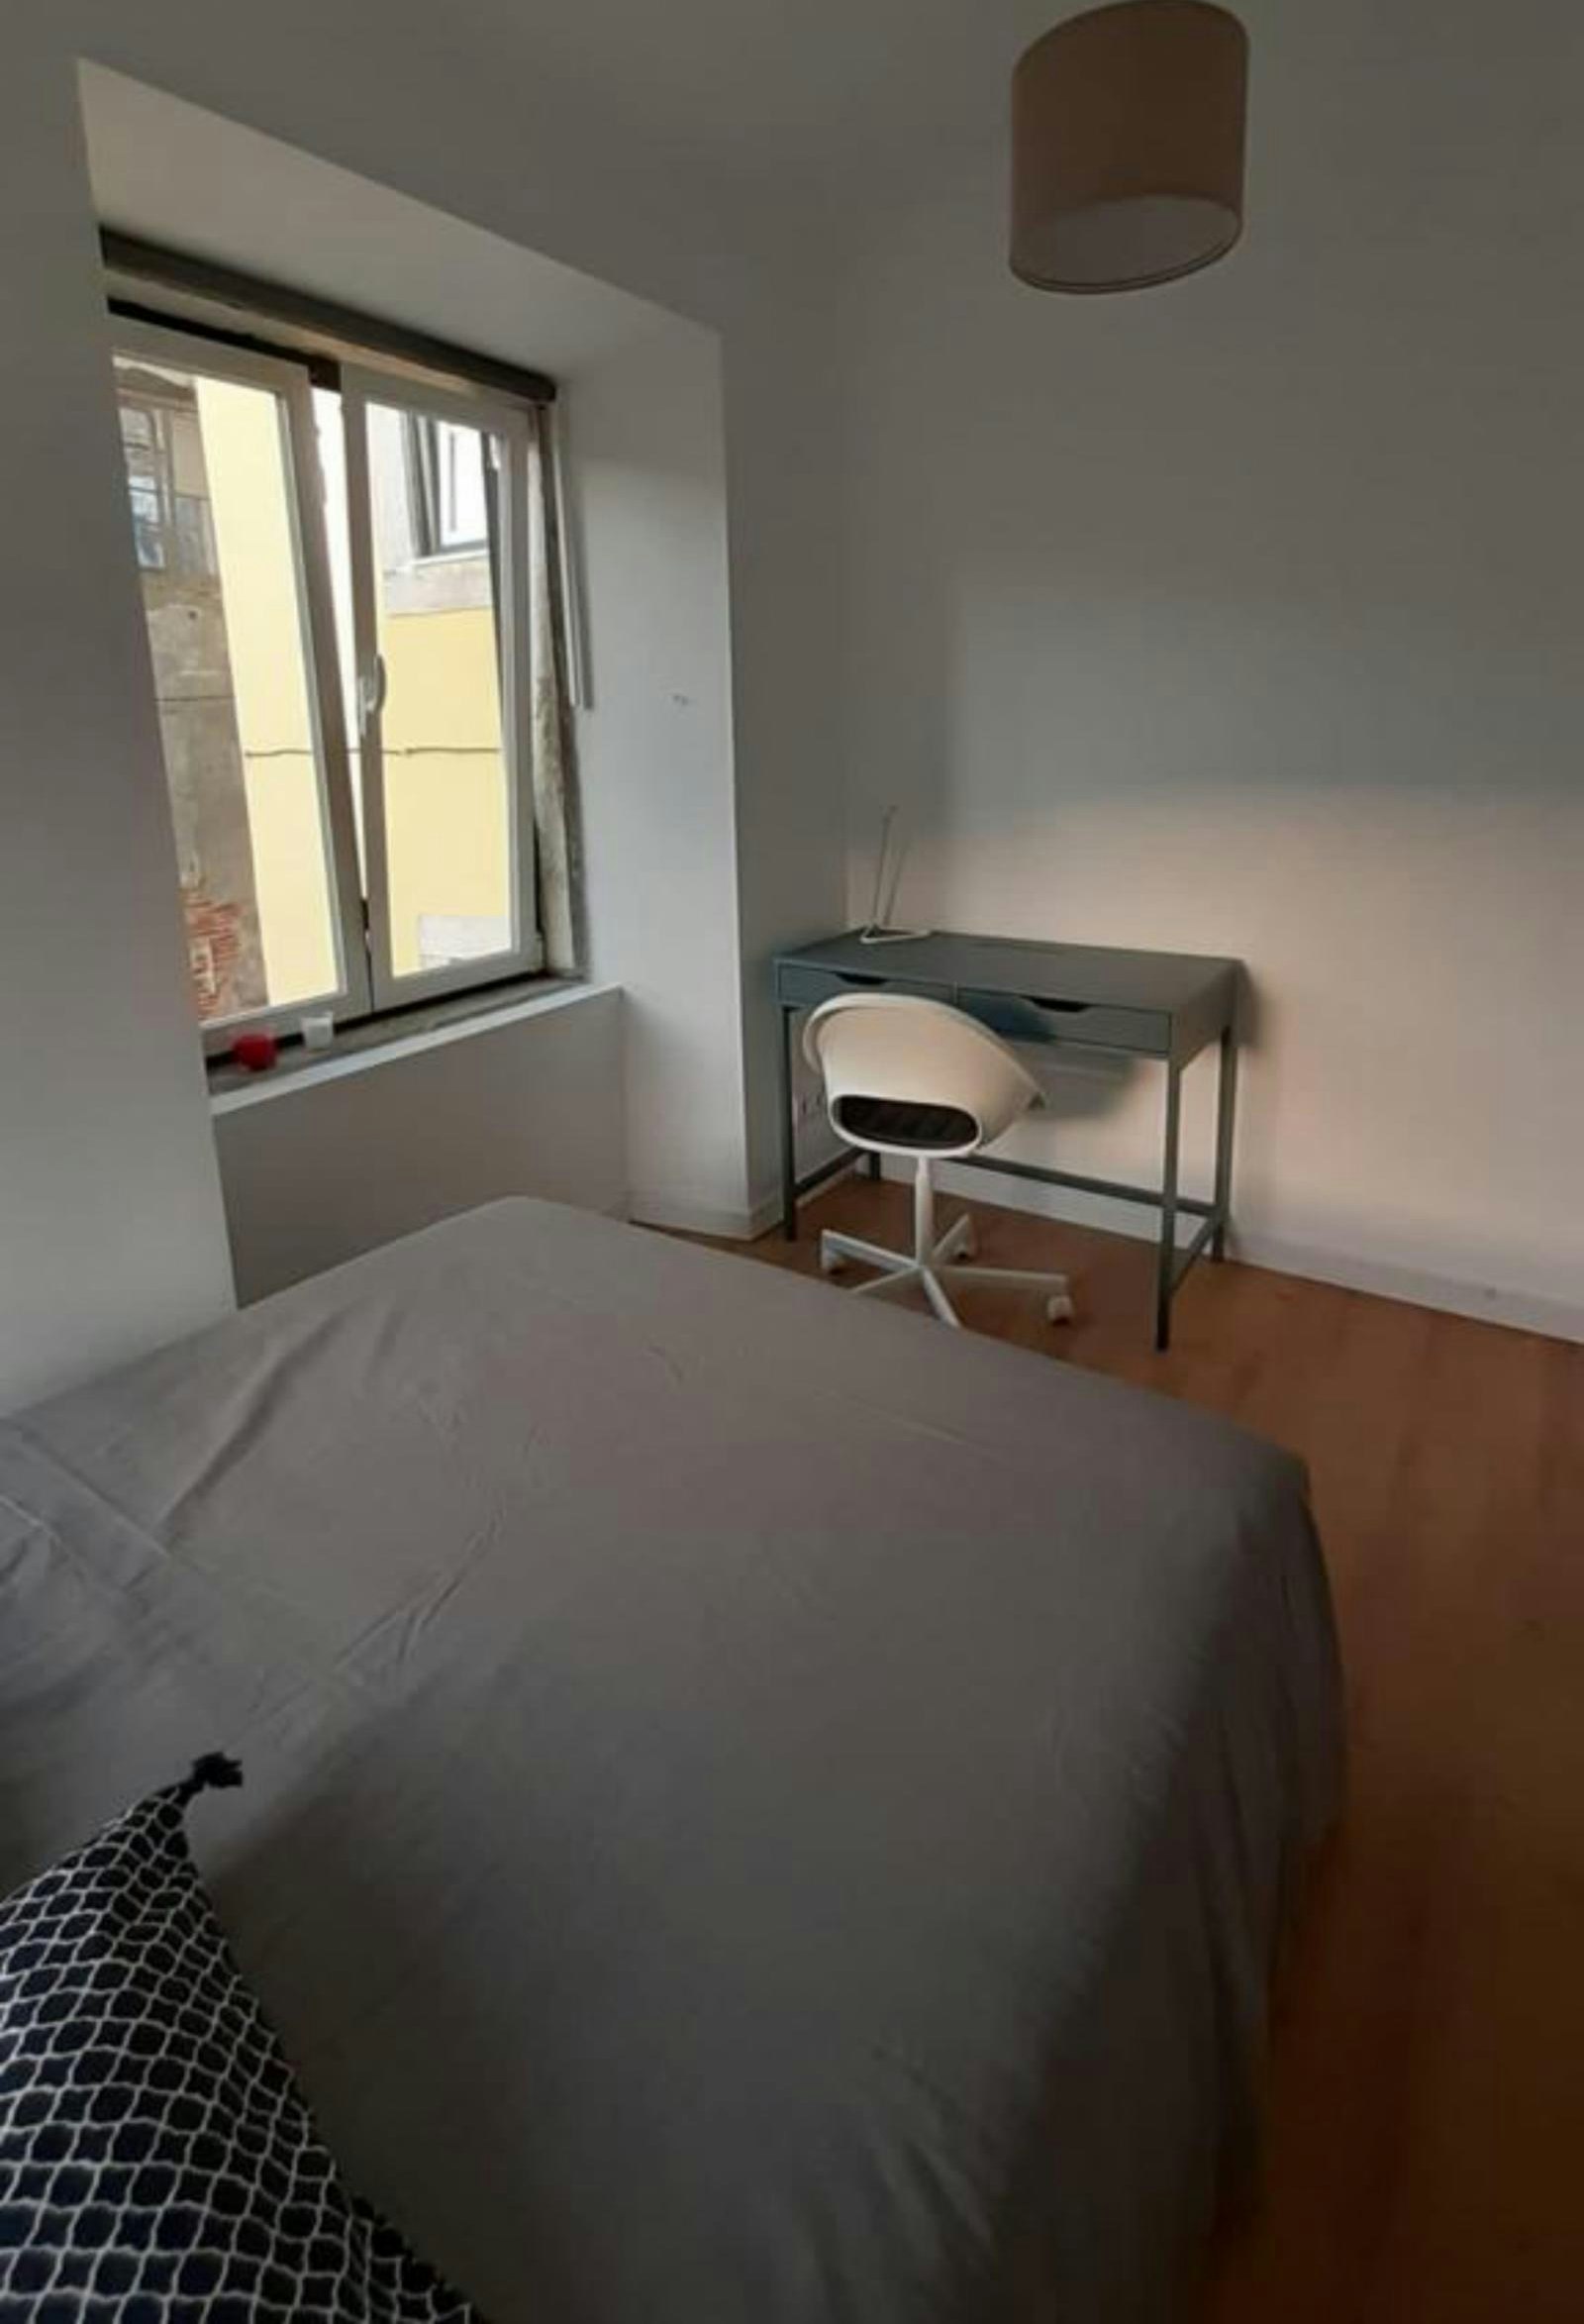 Sunny double bedroom in the centre of Setúbal